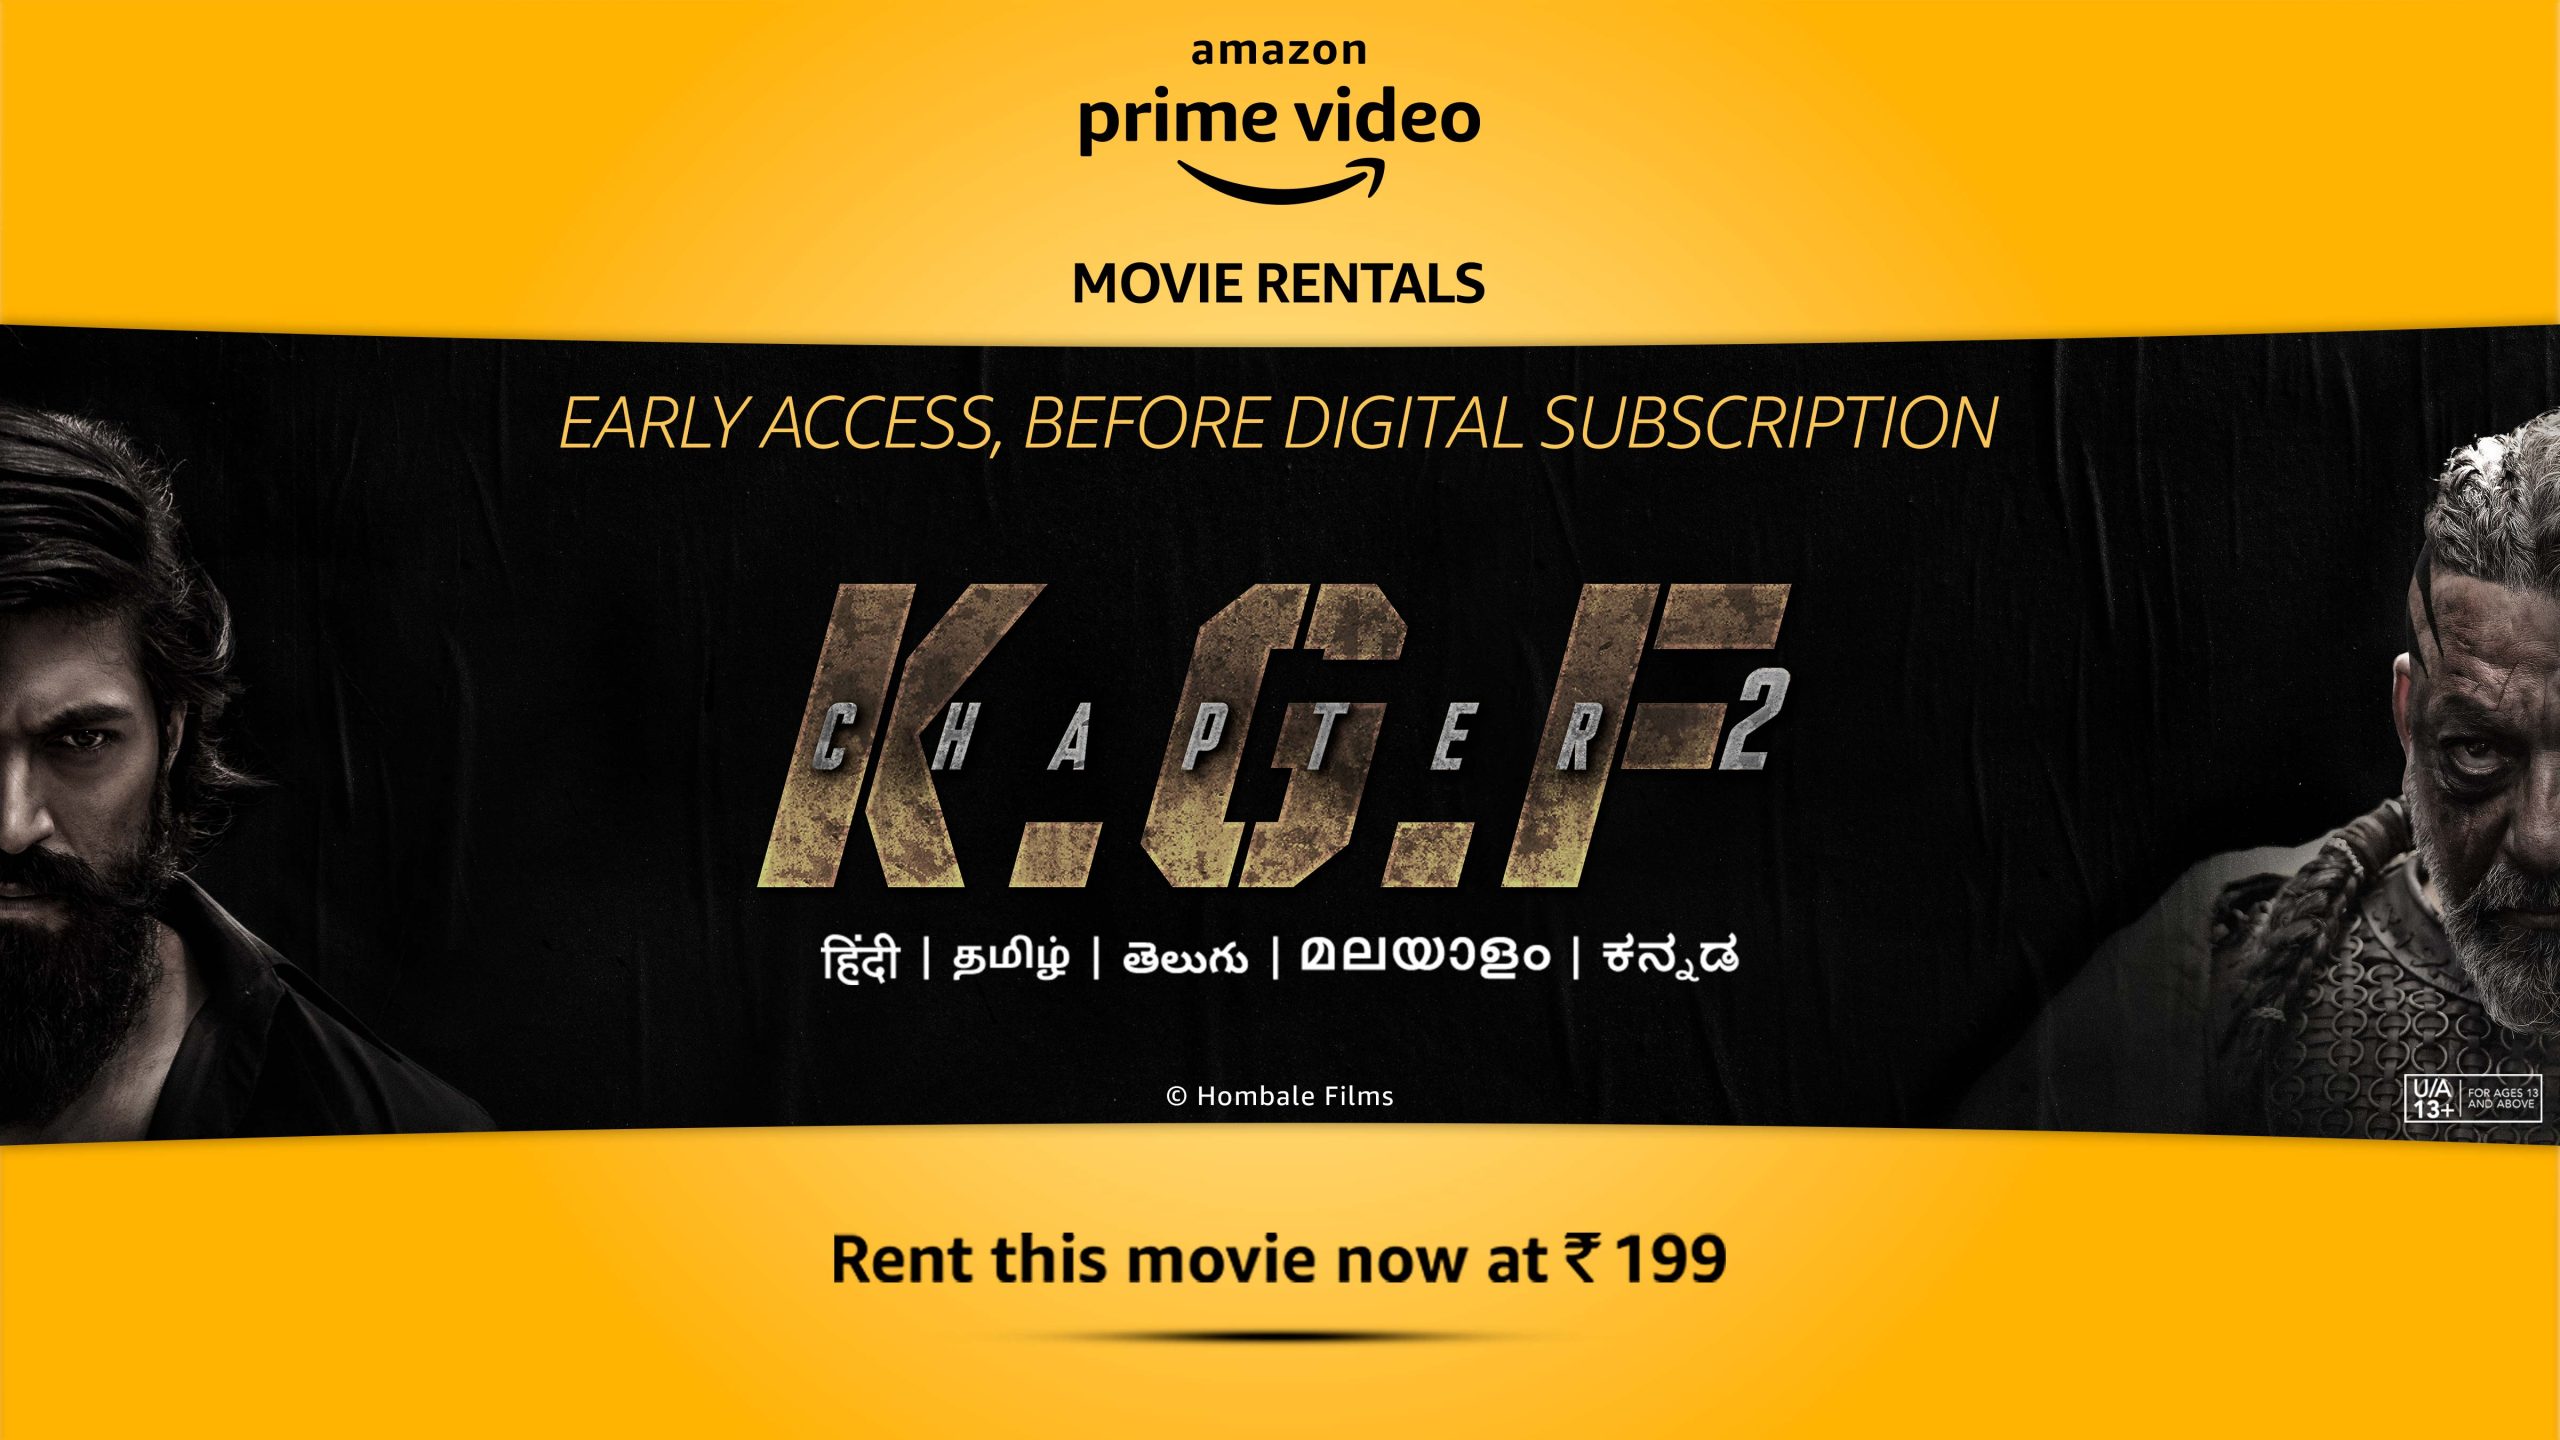 K.G.F: Chapter 2, now available for ‘Early Access’ rentals on Amazon Prime Video!